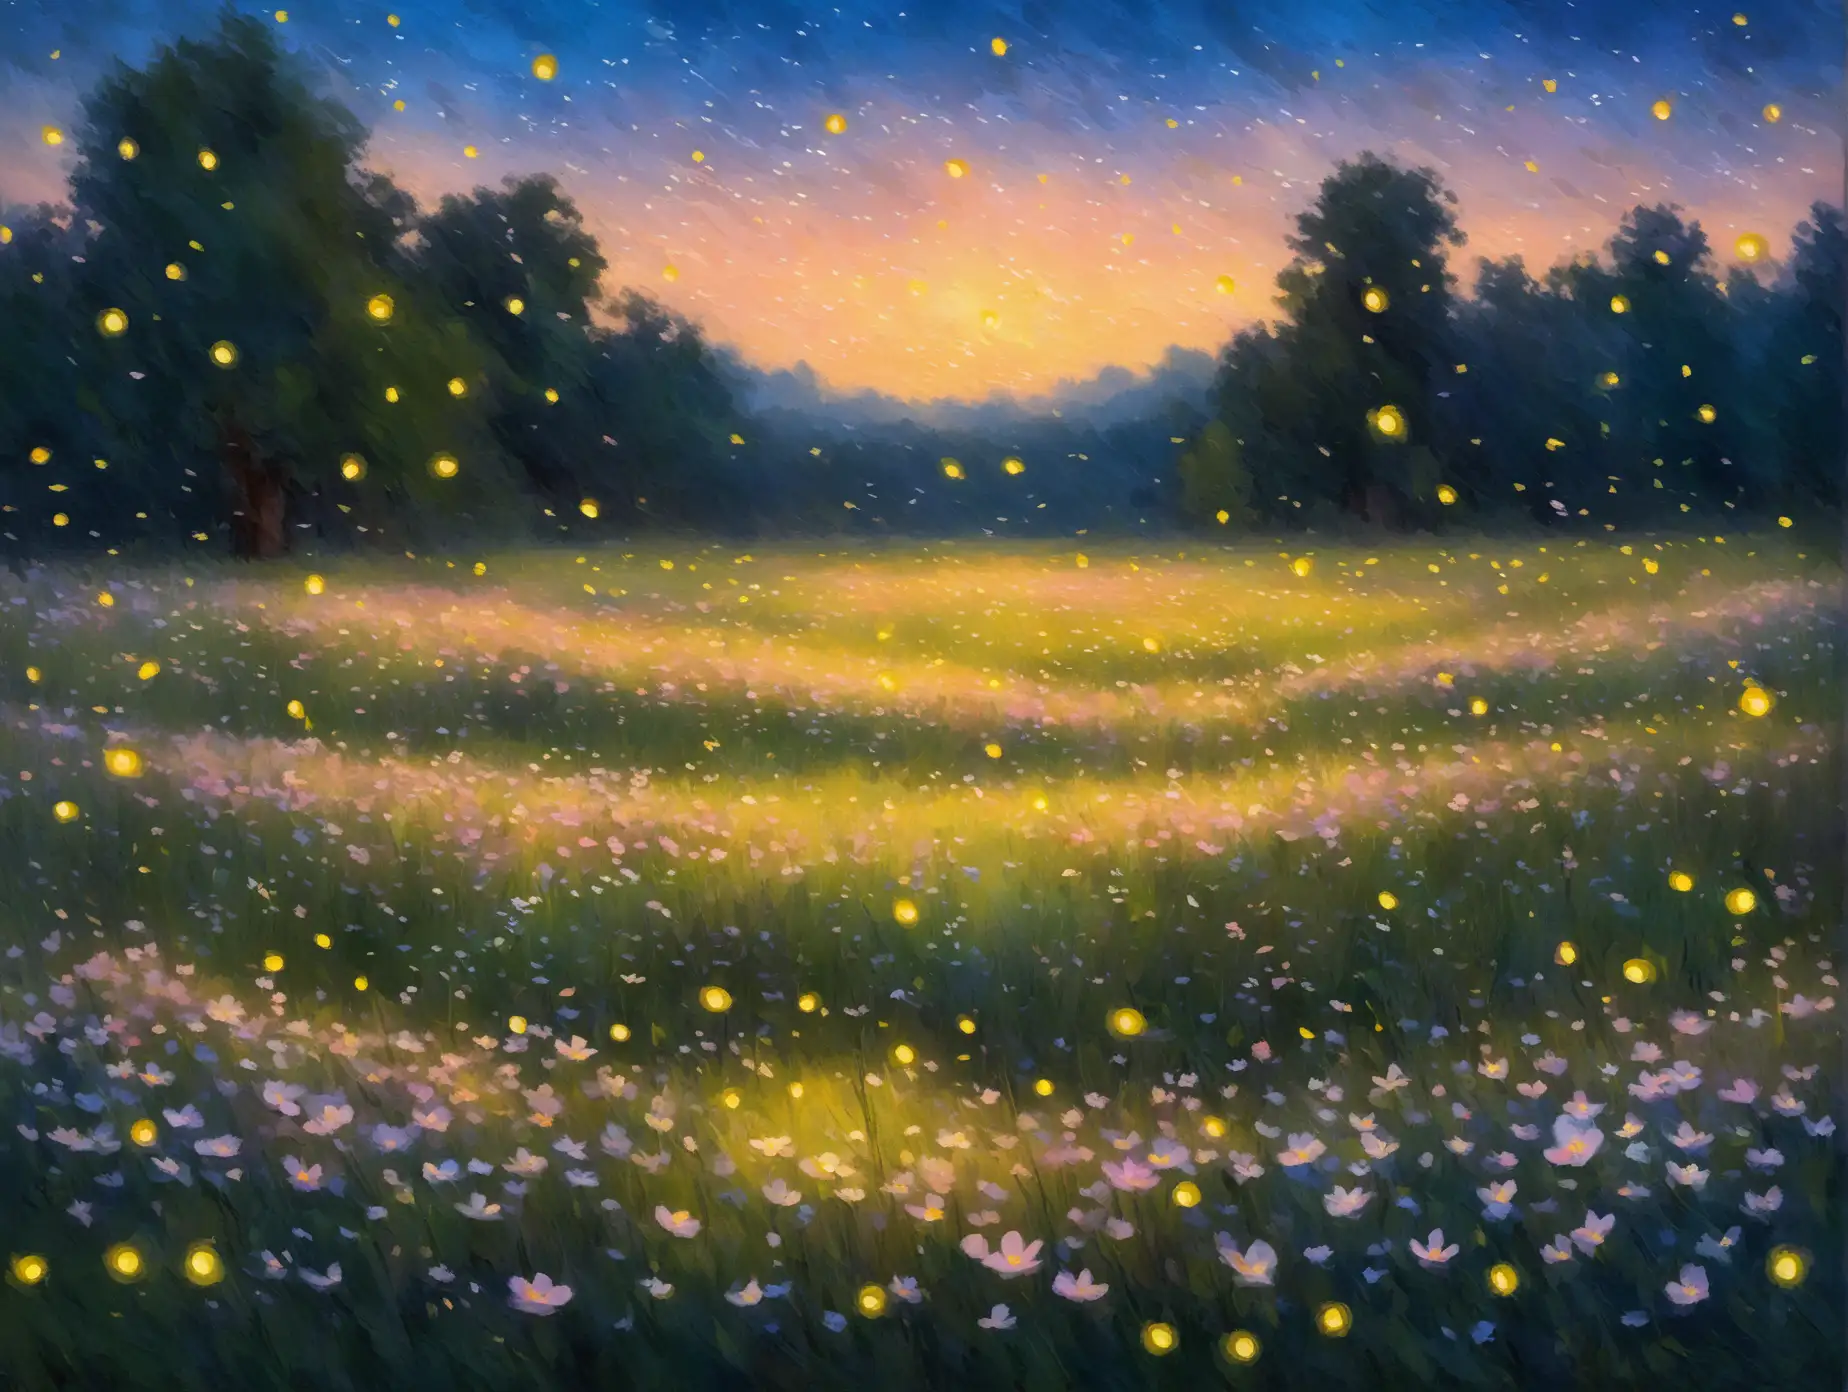 Dusk Meadow with FourOClock Flowers and Fireflies Impressionist Oil Painting